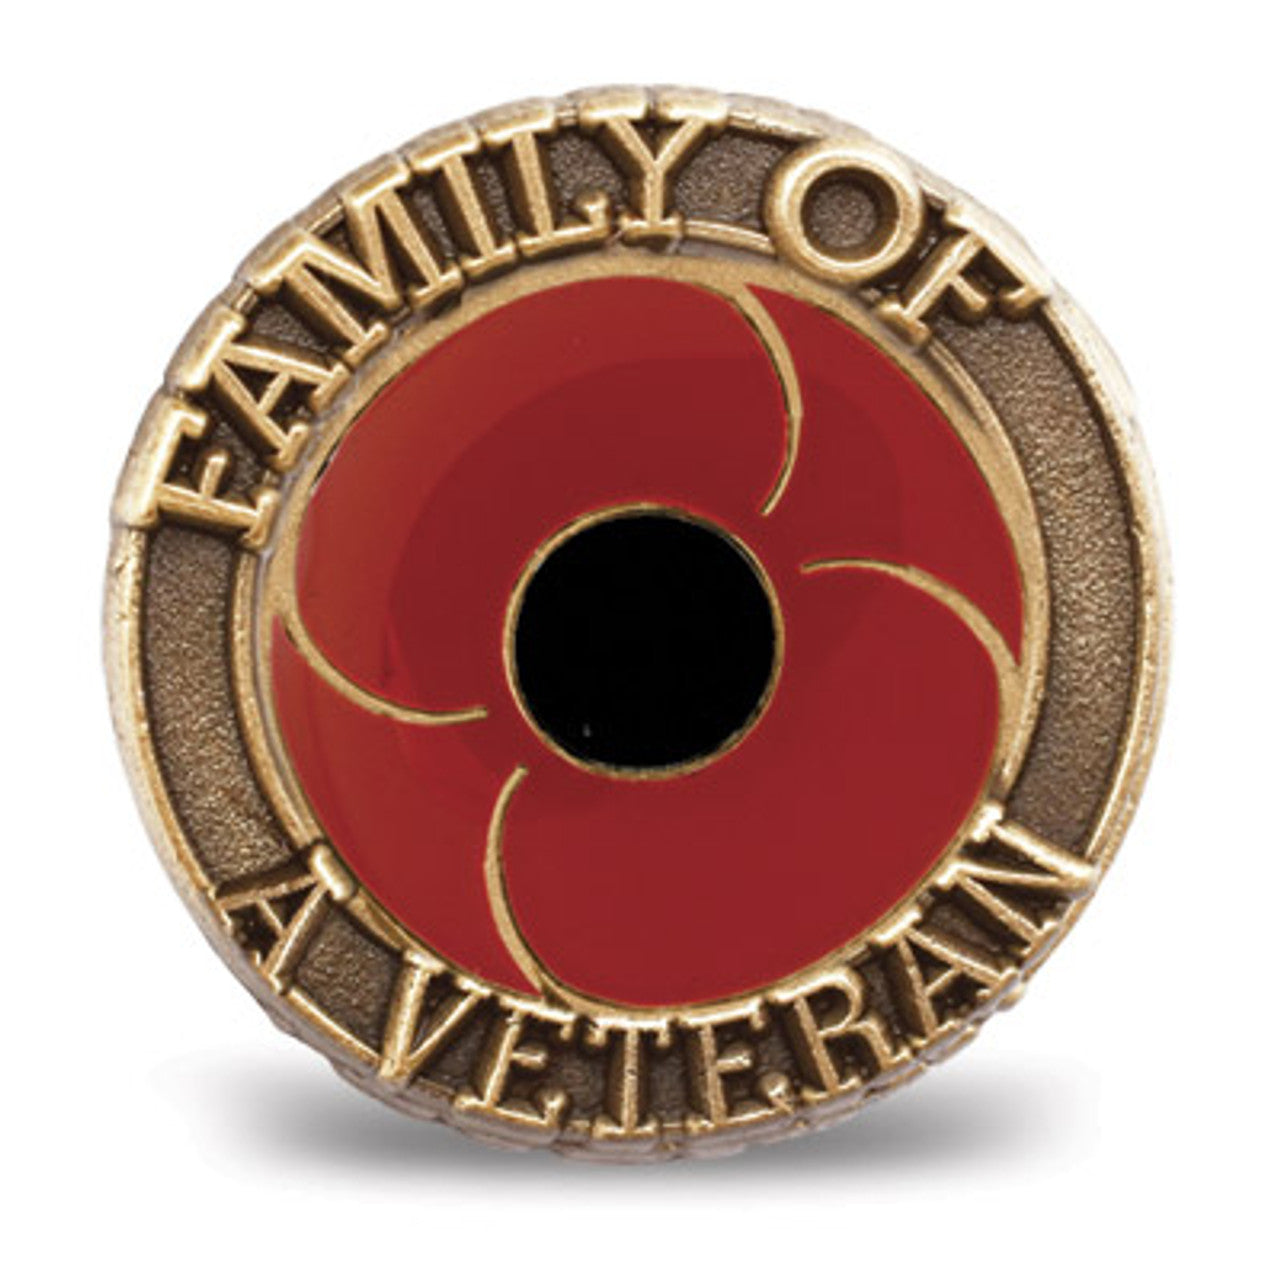 The stunning 25mm rich enamel-filled badge is a must-have for anyone with a family connection to military service. www.defenceqstore.com.au